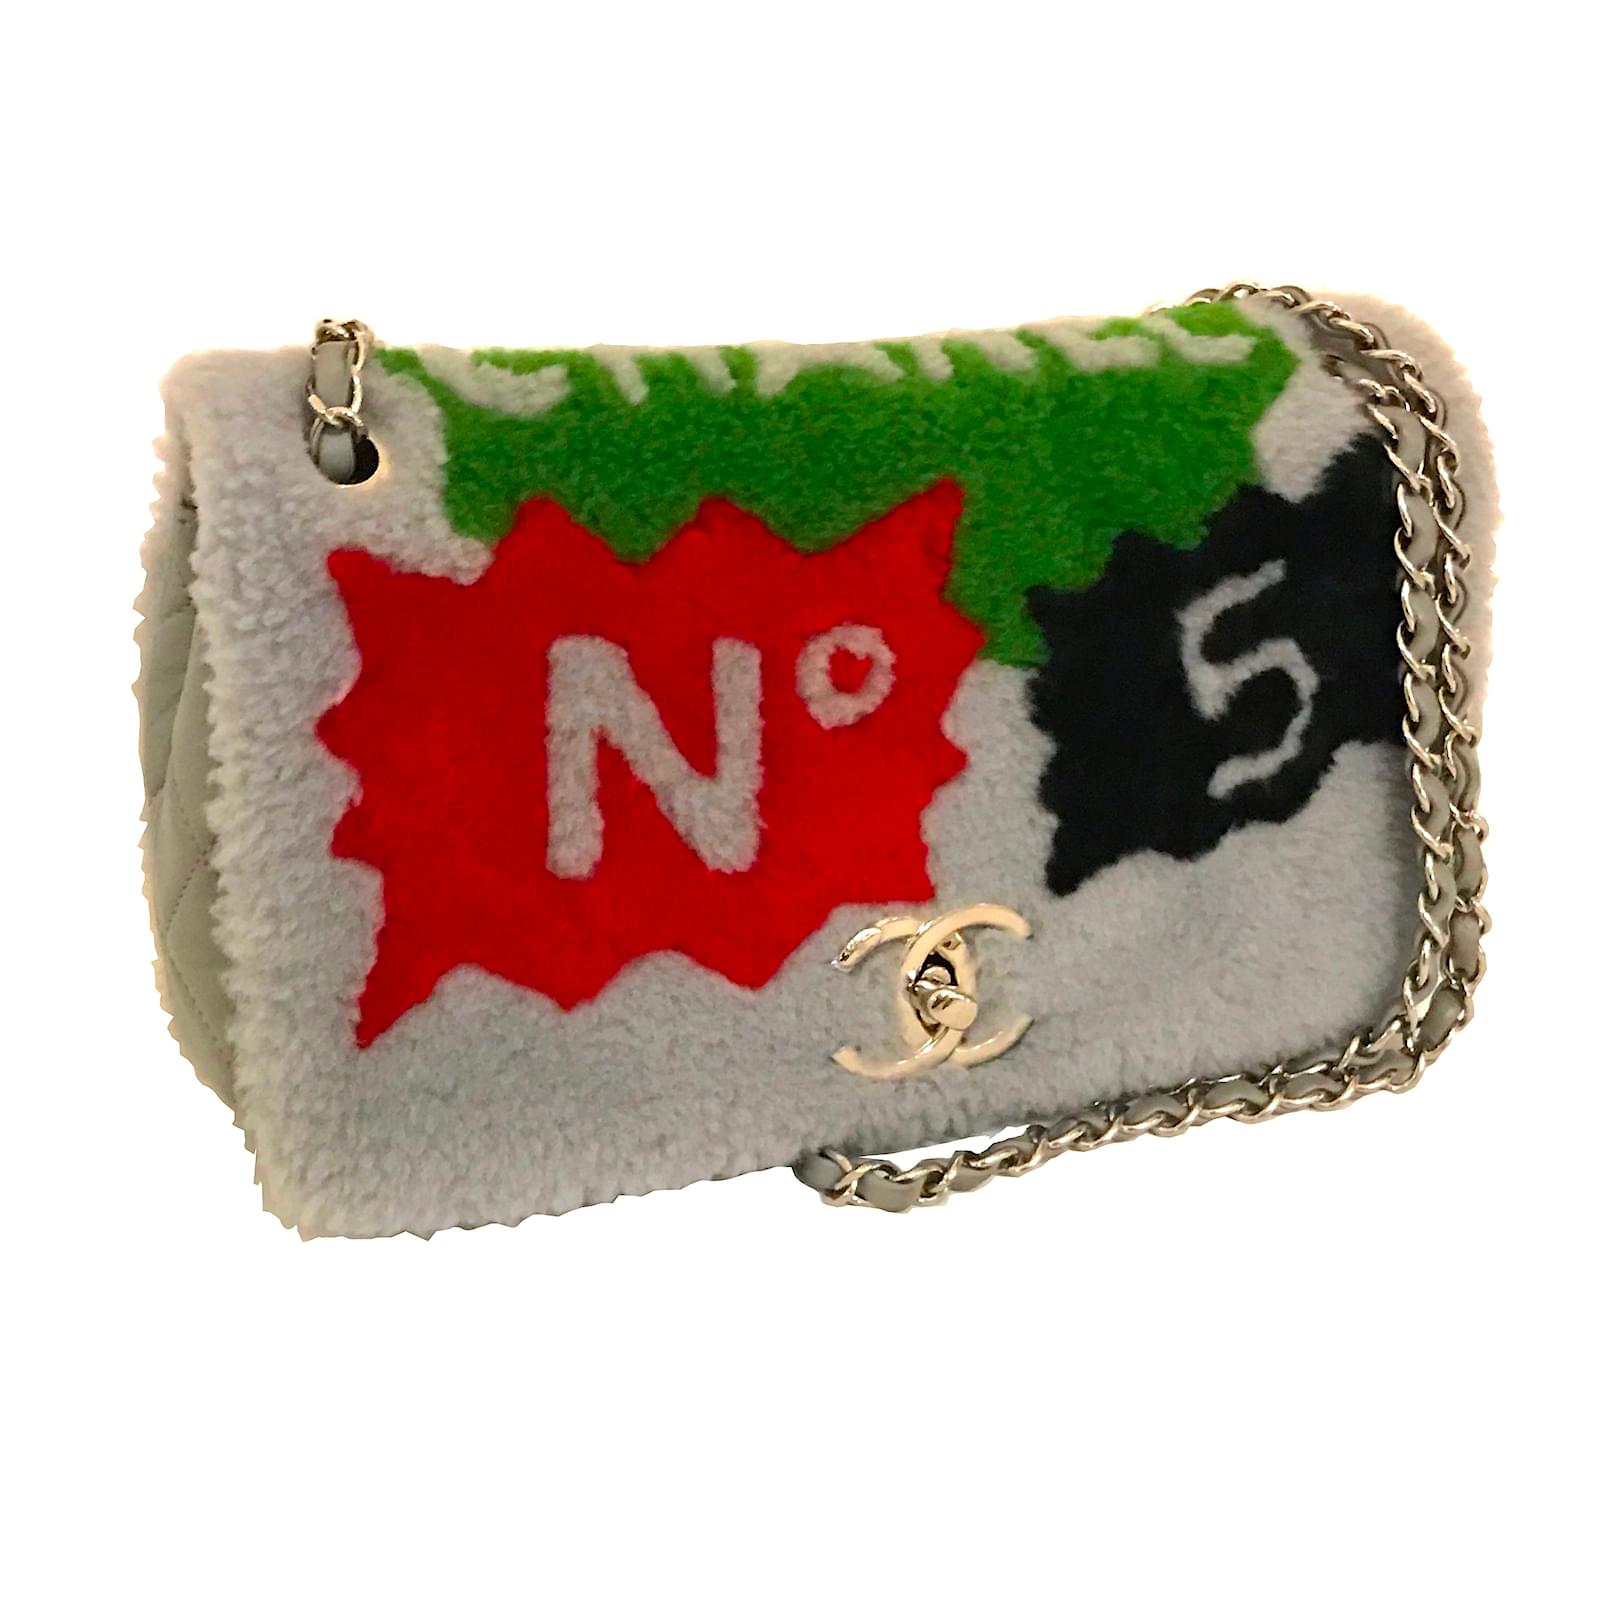 100 % Chanel Patchwork No. 5 Comic Shearling flap bag in grey